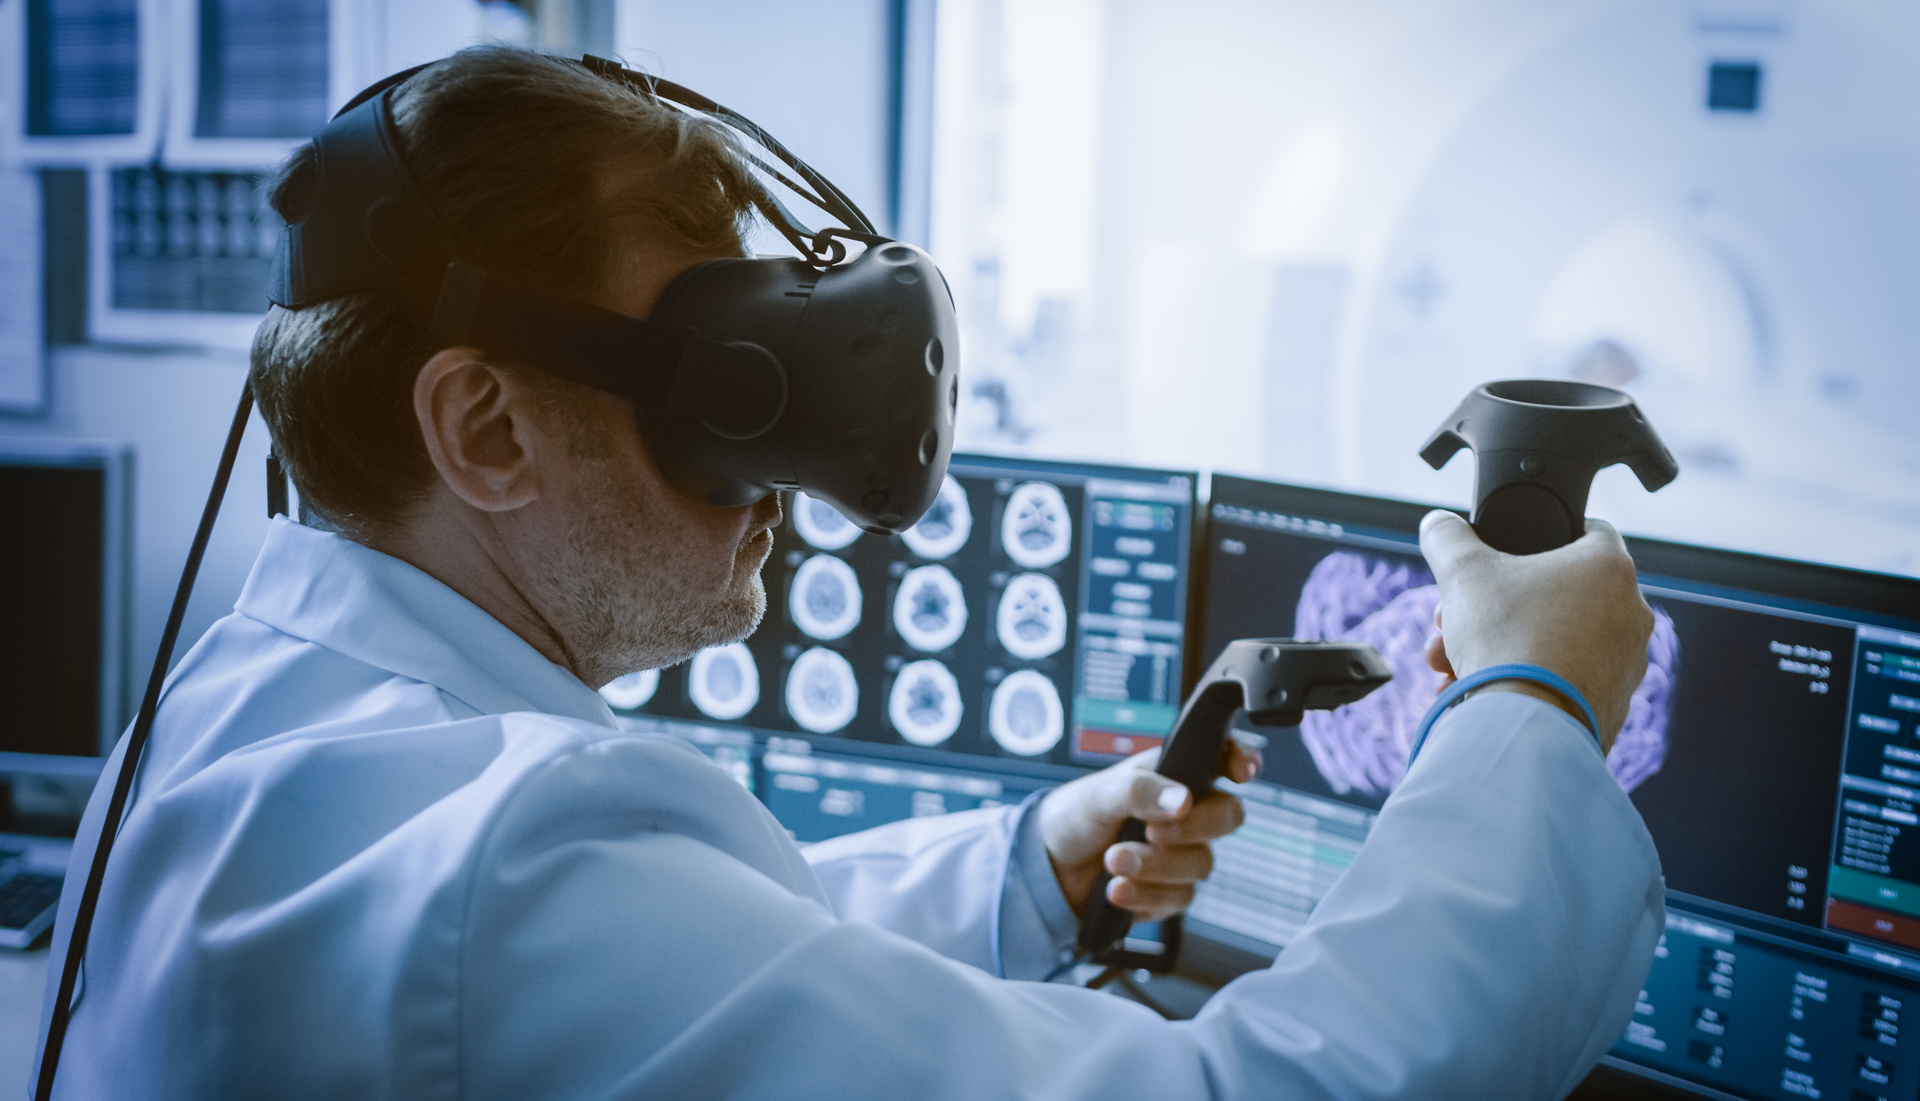 Medical laboratory surgeon wearing virtual reality headset uses controllers to remotely operate patient with medical robot